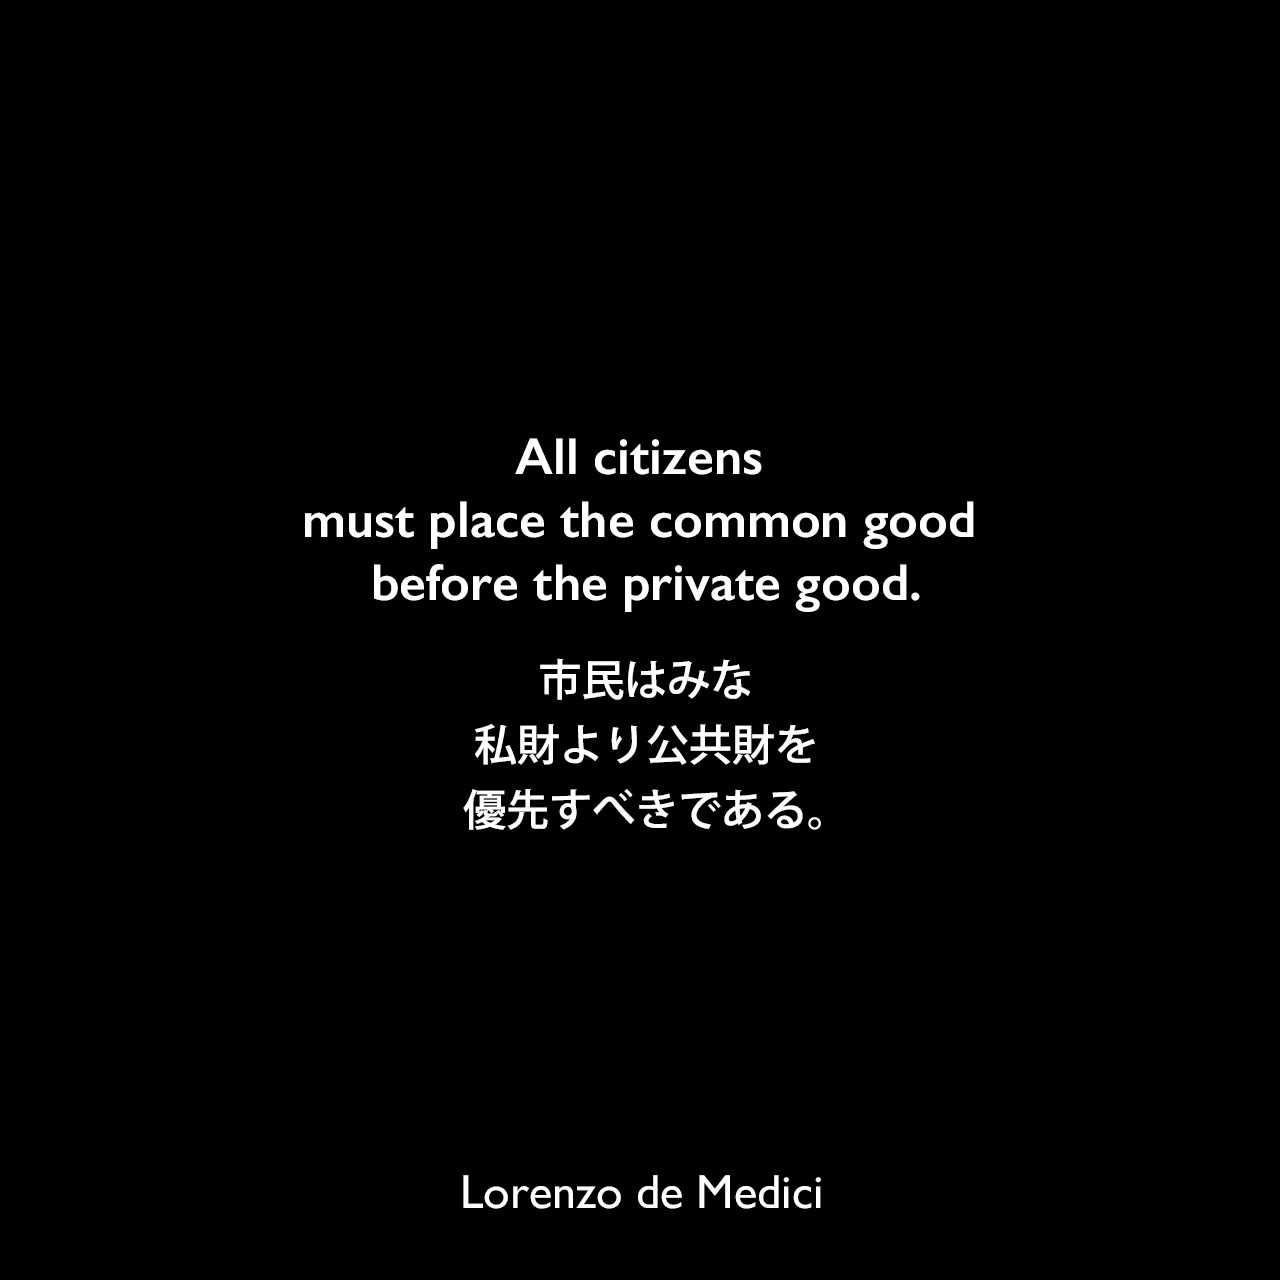 All citizens must place the common good before the private good.市民はみな、私財より公共財を優先すべきである。Lorenzo de Medici